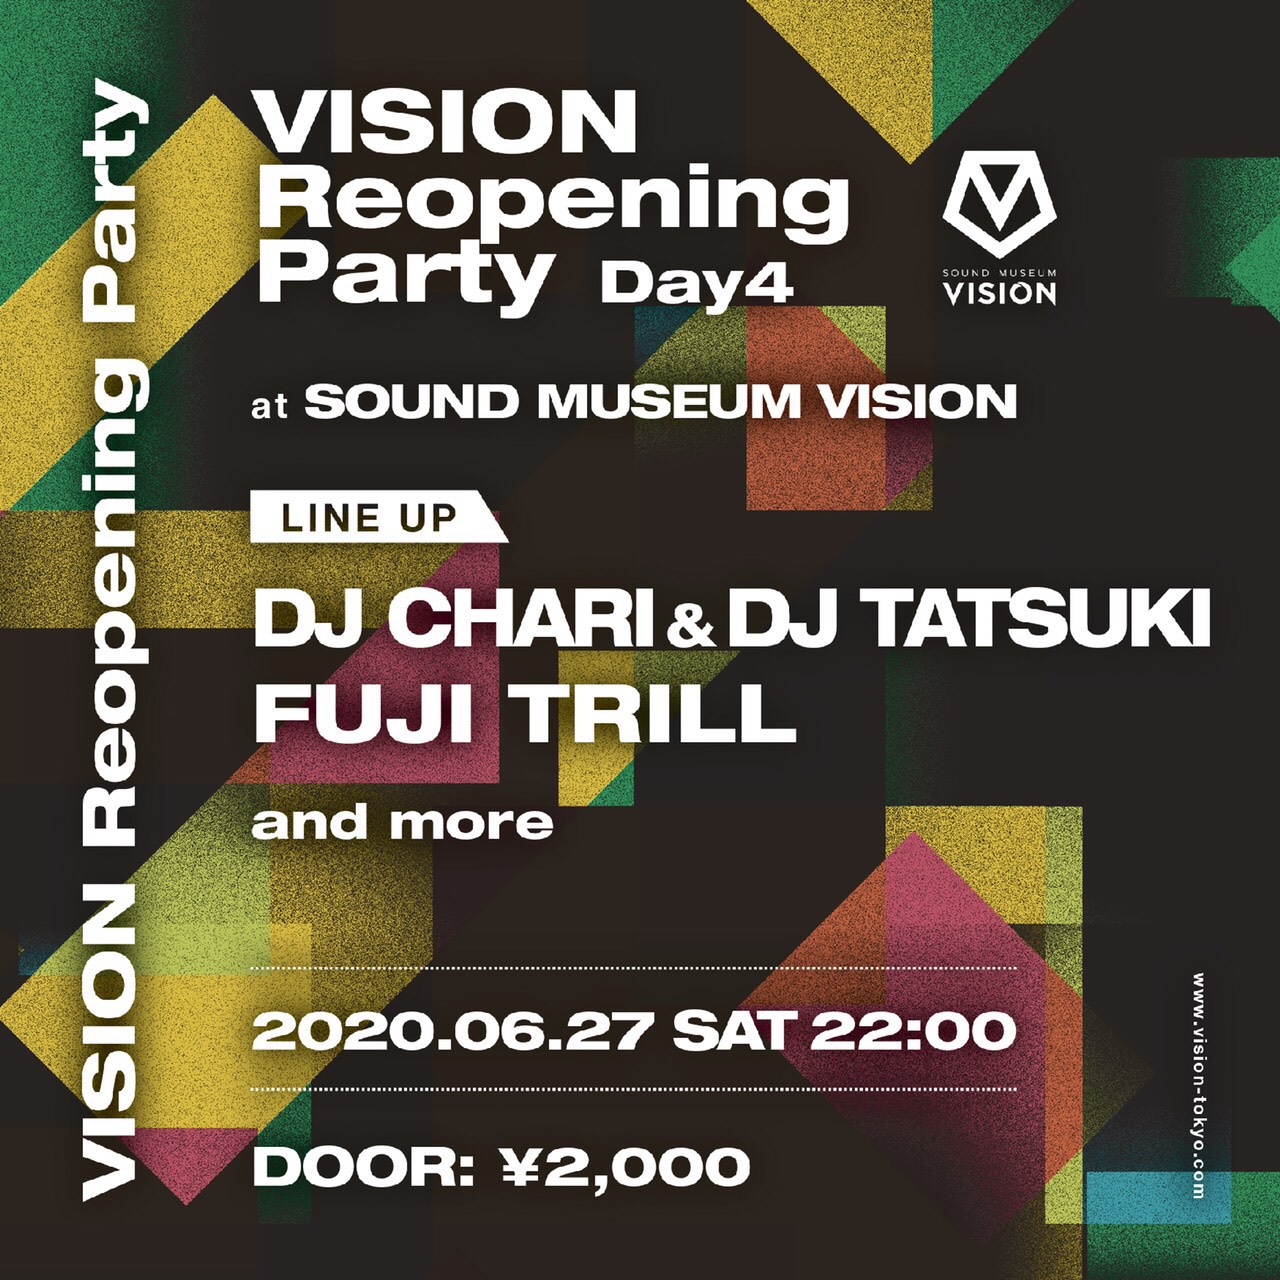 VISION Reopening Party Day4